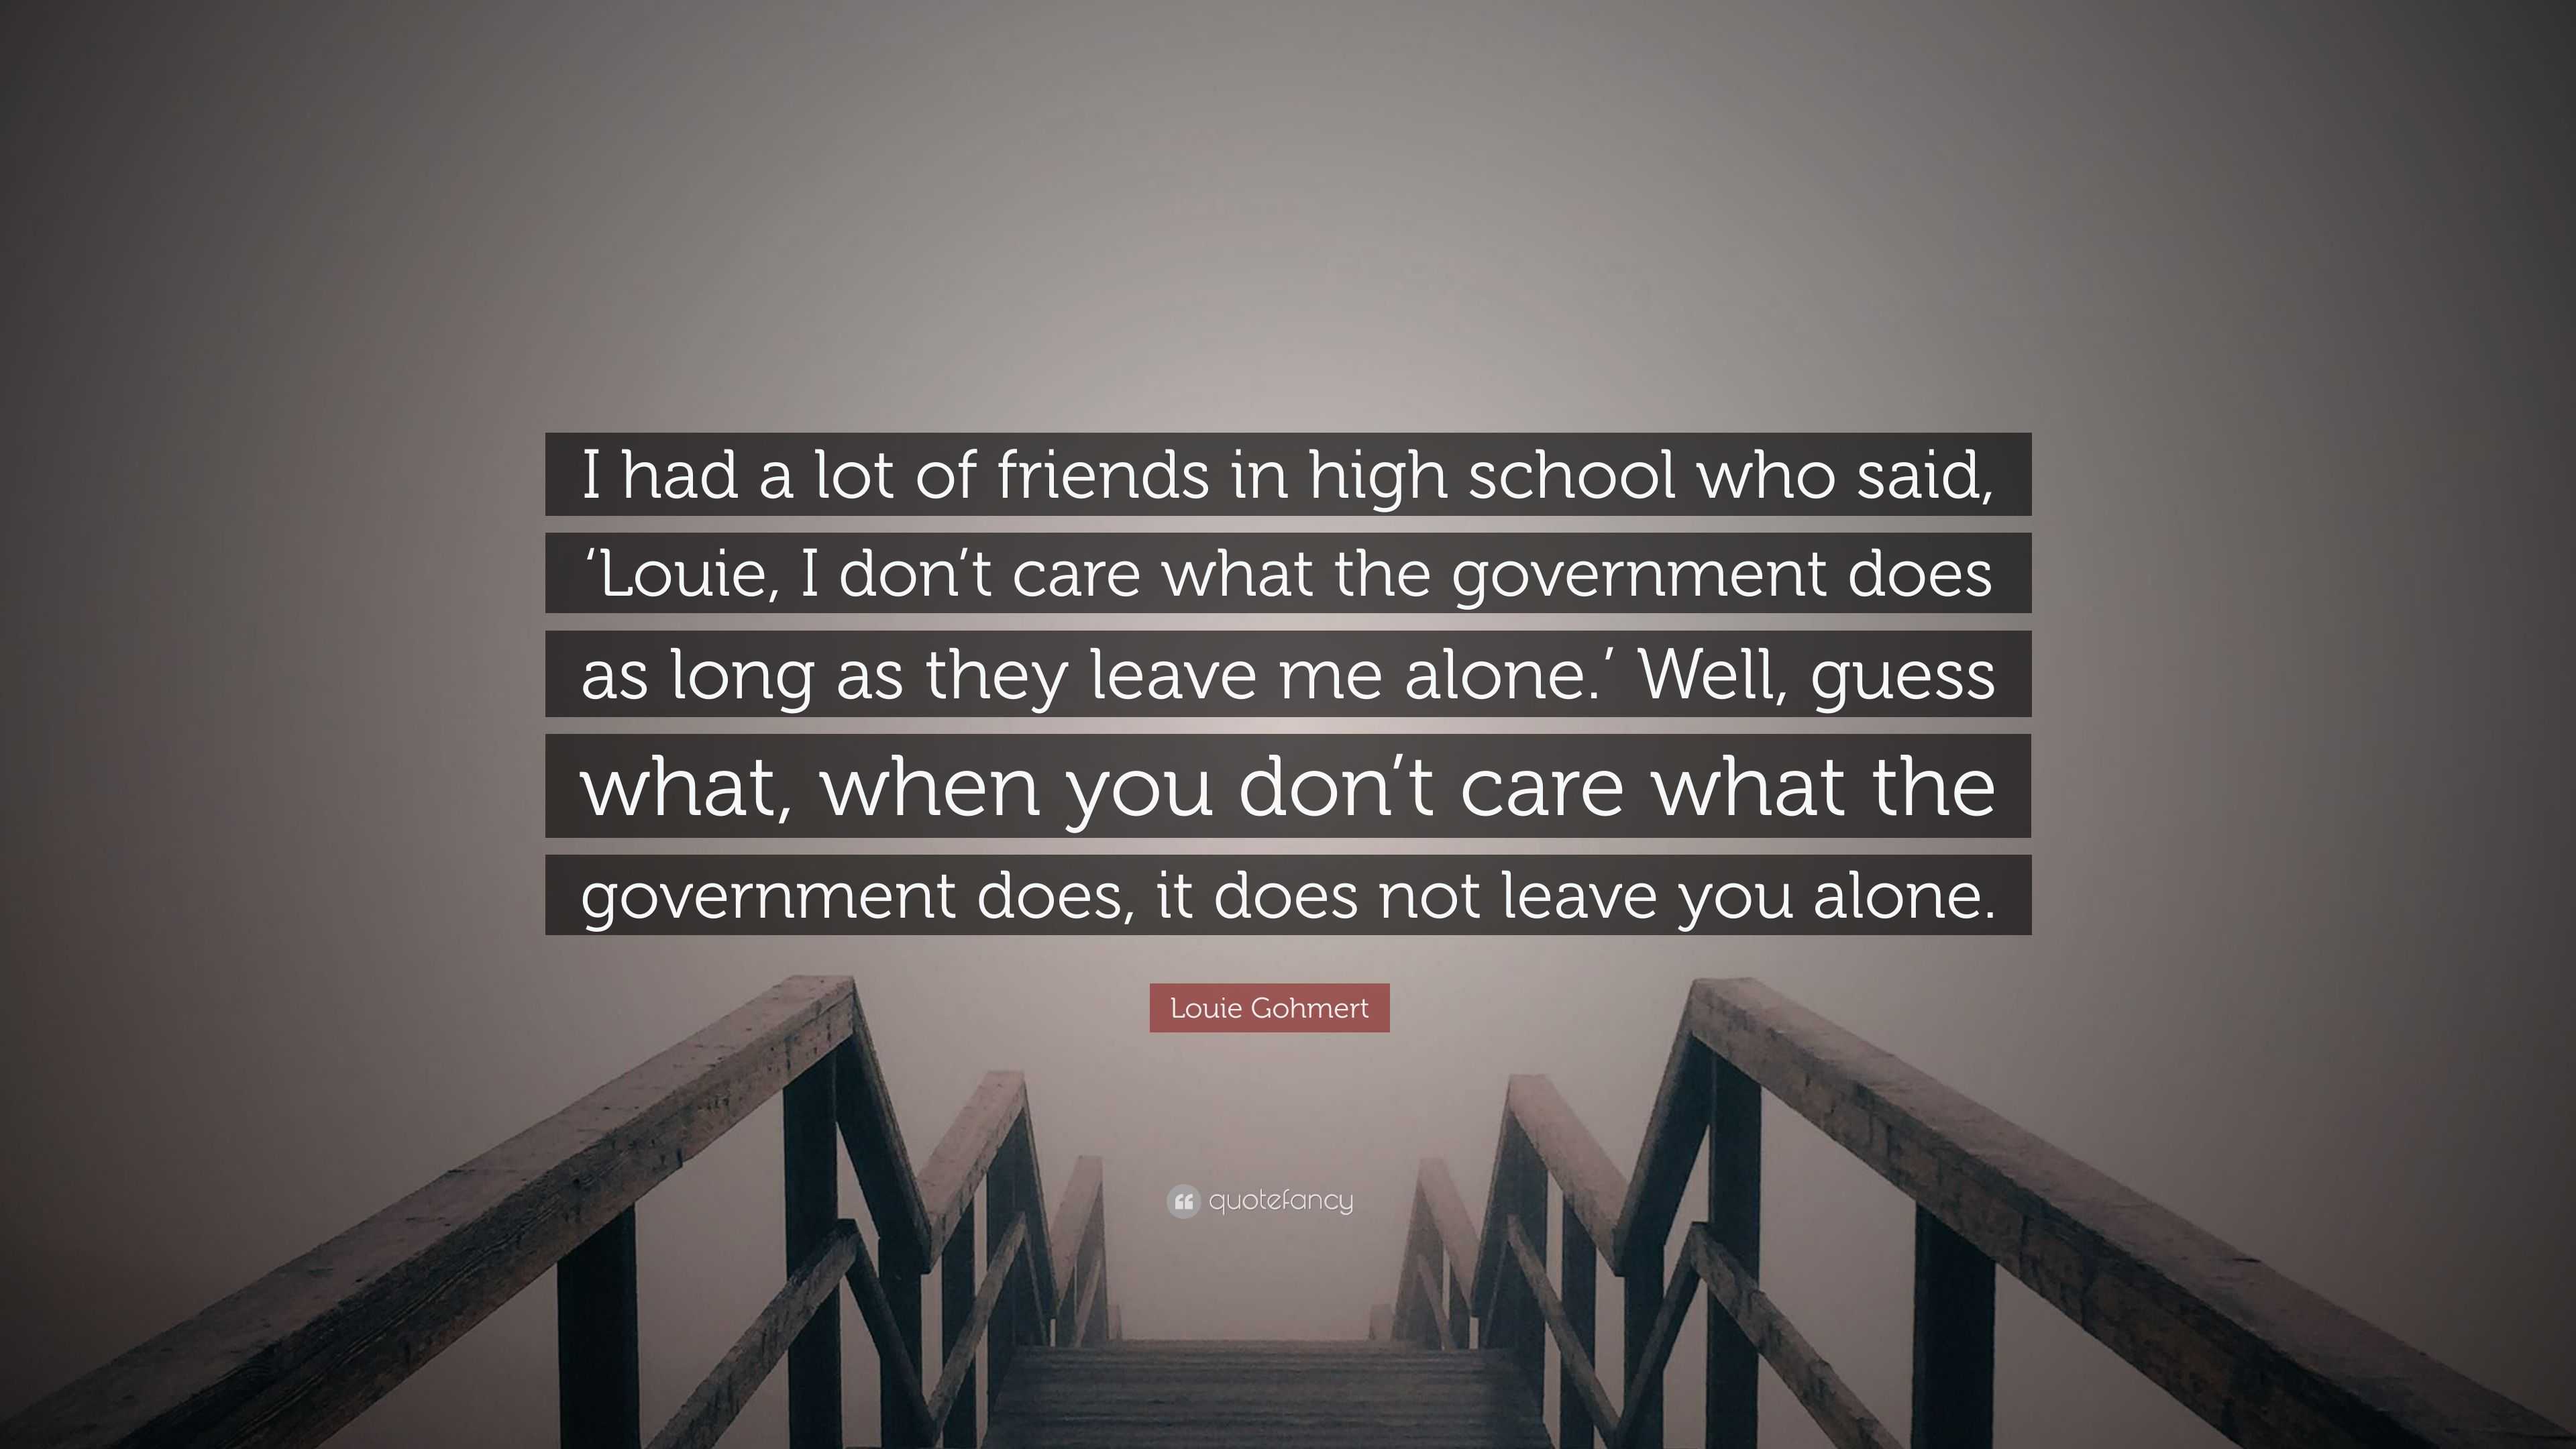 Louie Gohmert Quote: “I had a lot of friends in high school who 'Louie, I don't care what the government does as long as they leave me a...”